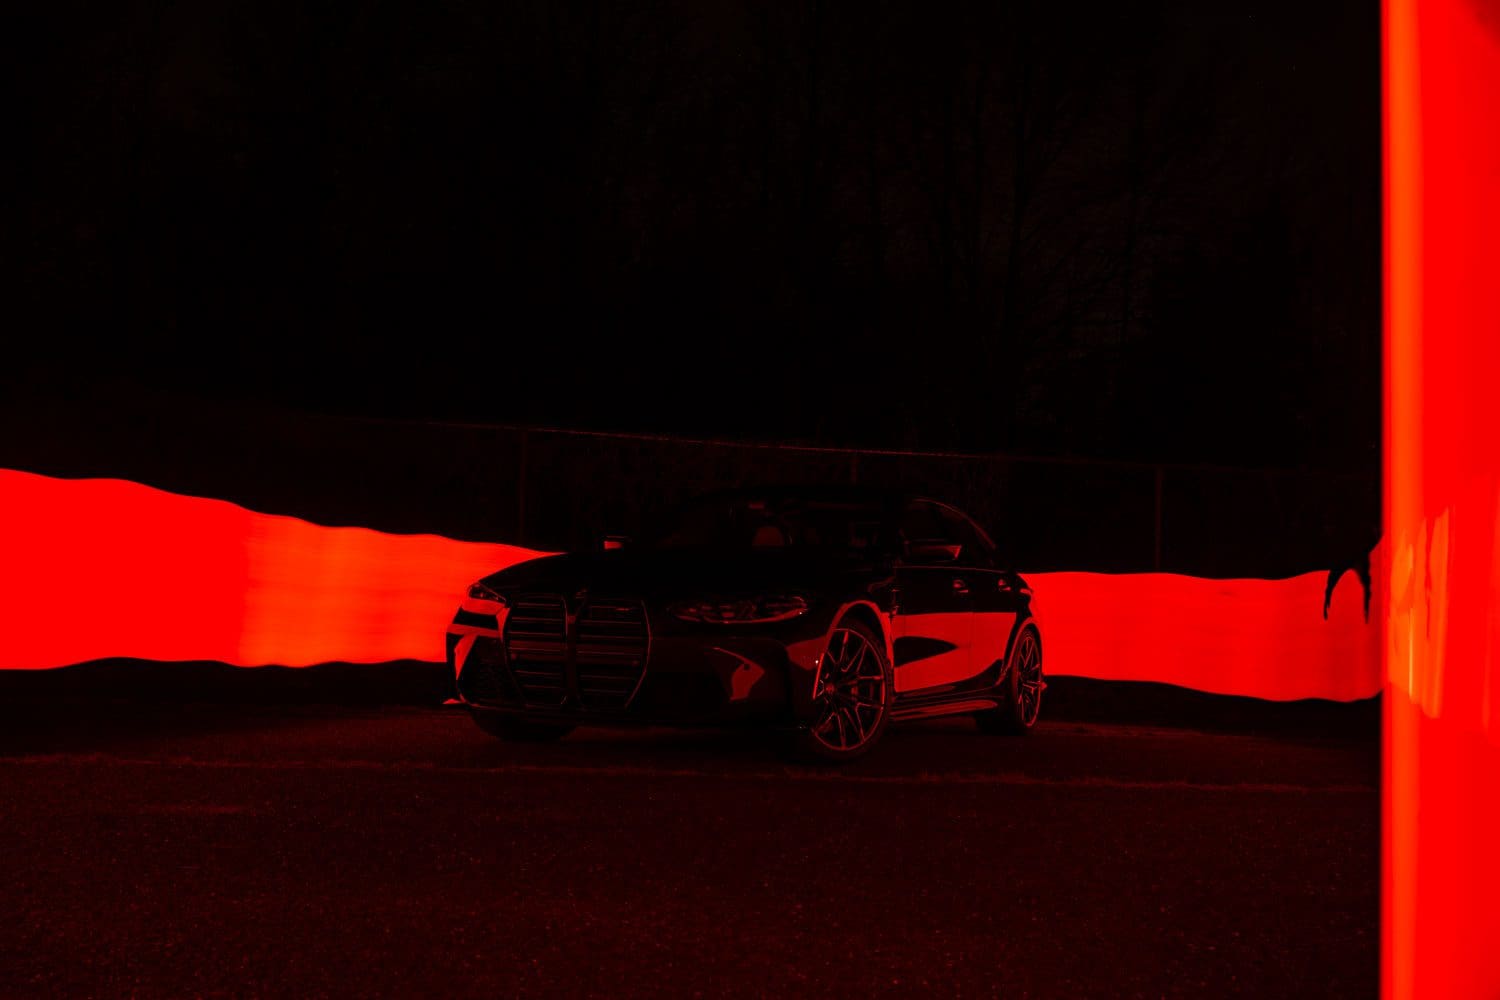 How to light paint a car with gels